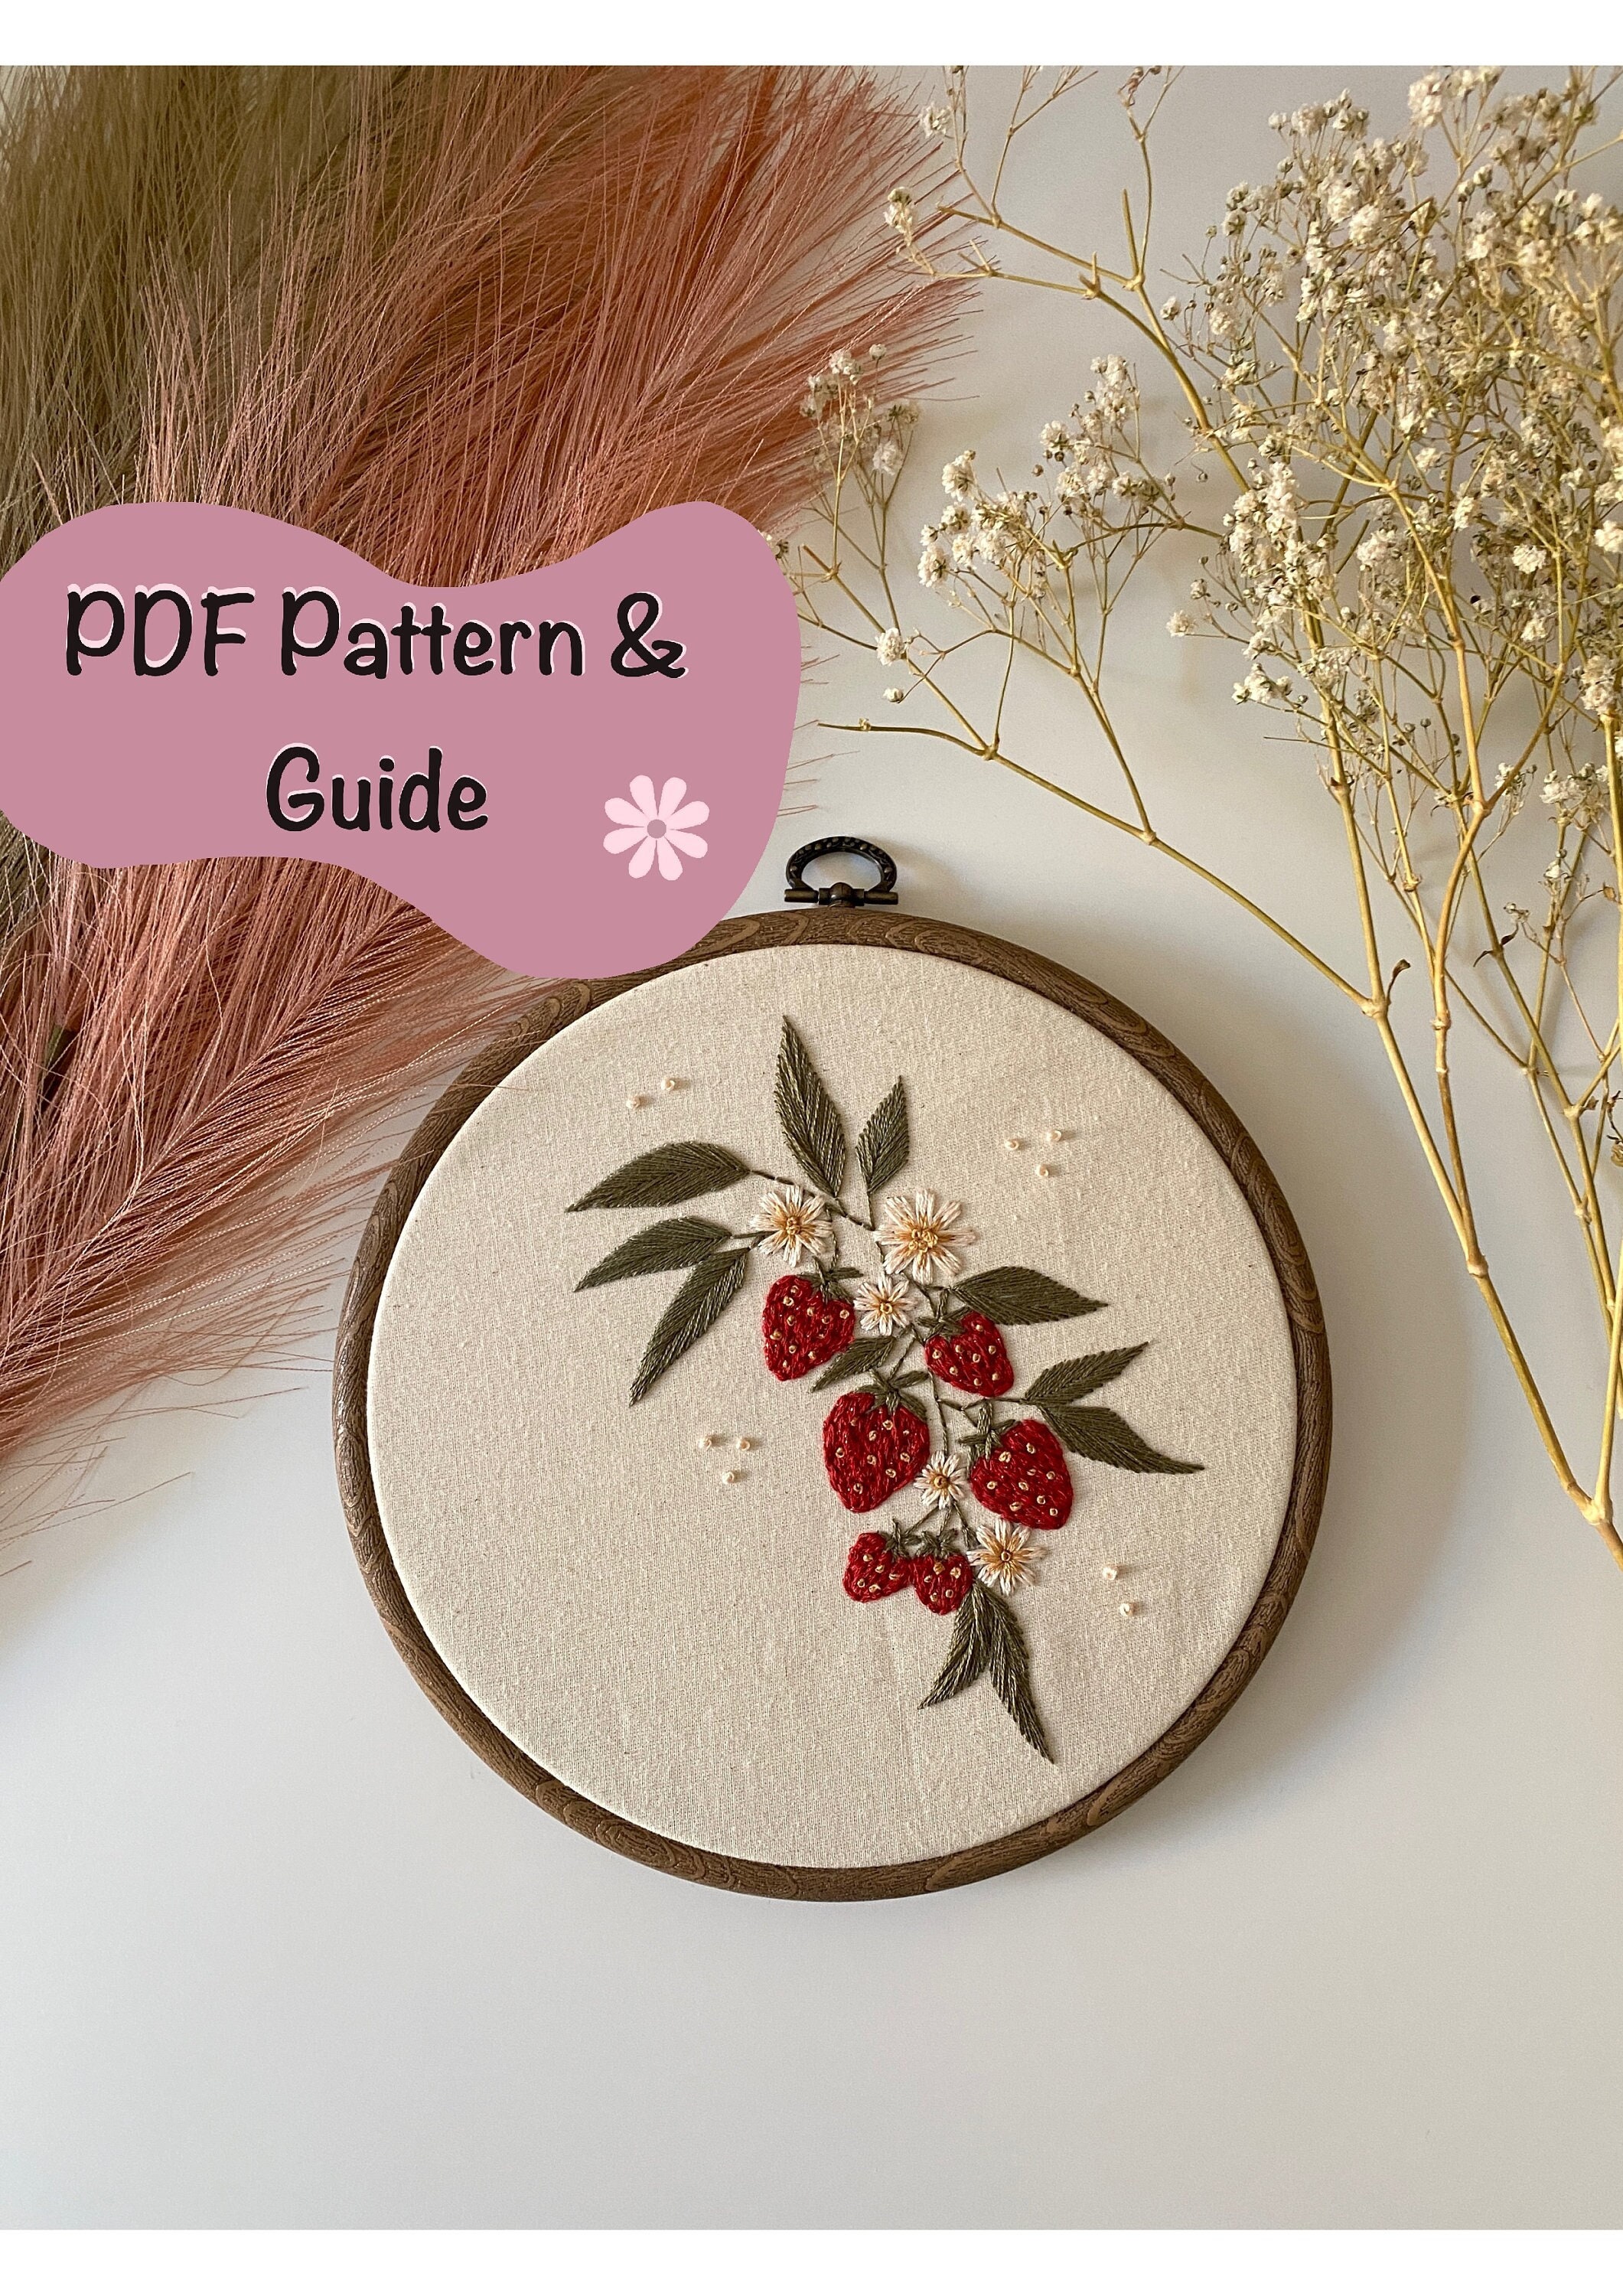 Blackberry Beads Machine Embroidery Designs Set for Hoop 4x4 and 6x8 for  Finishing Berries by Beats Stampwork 